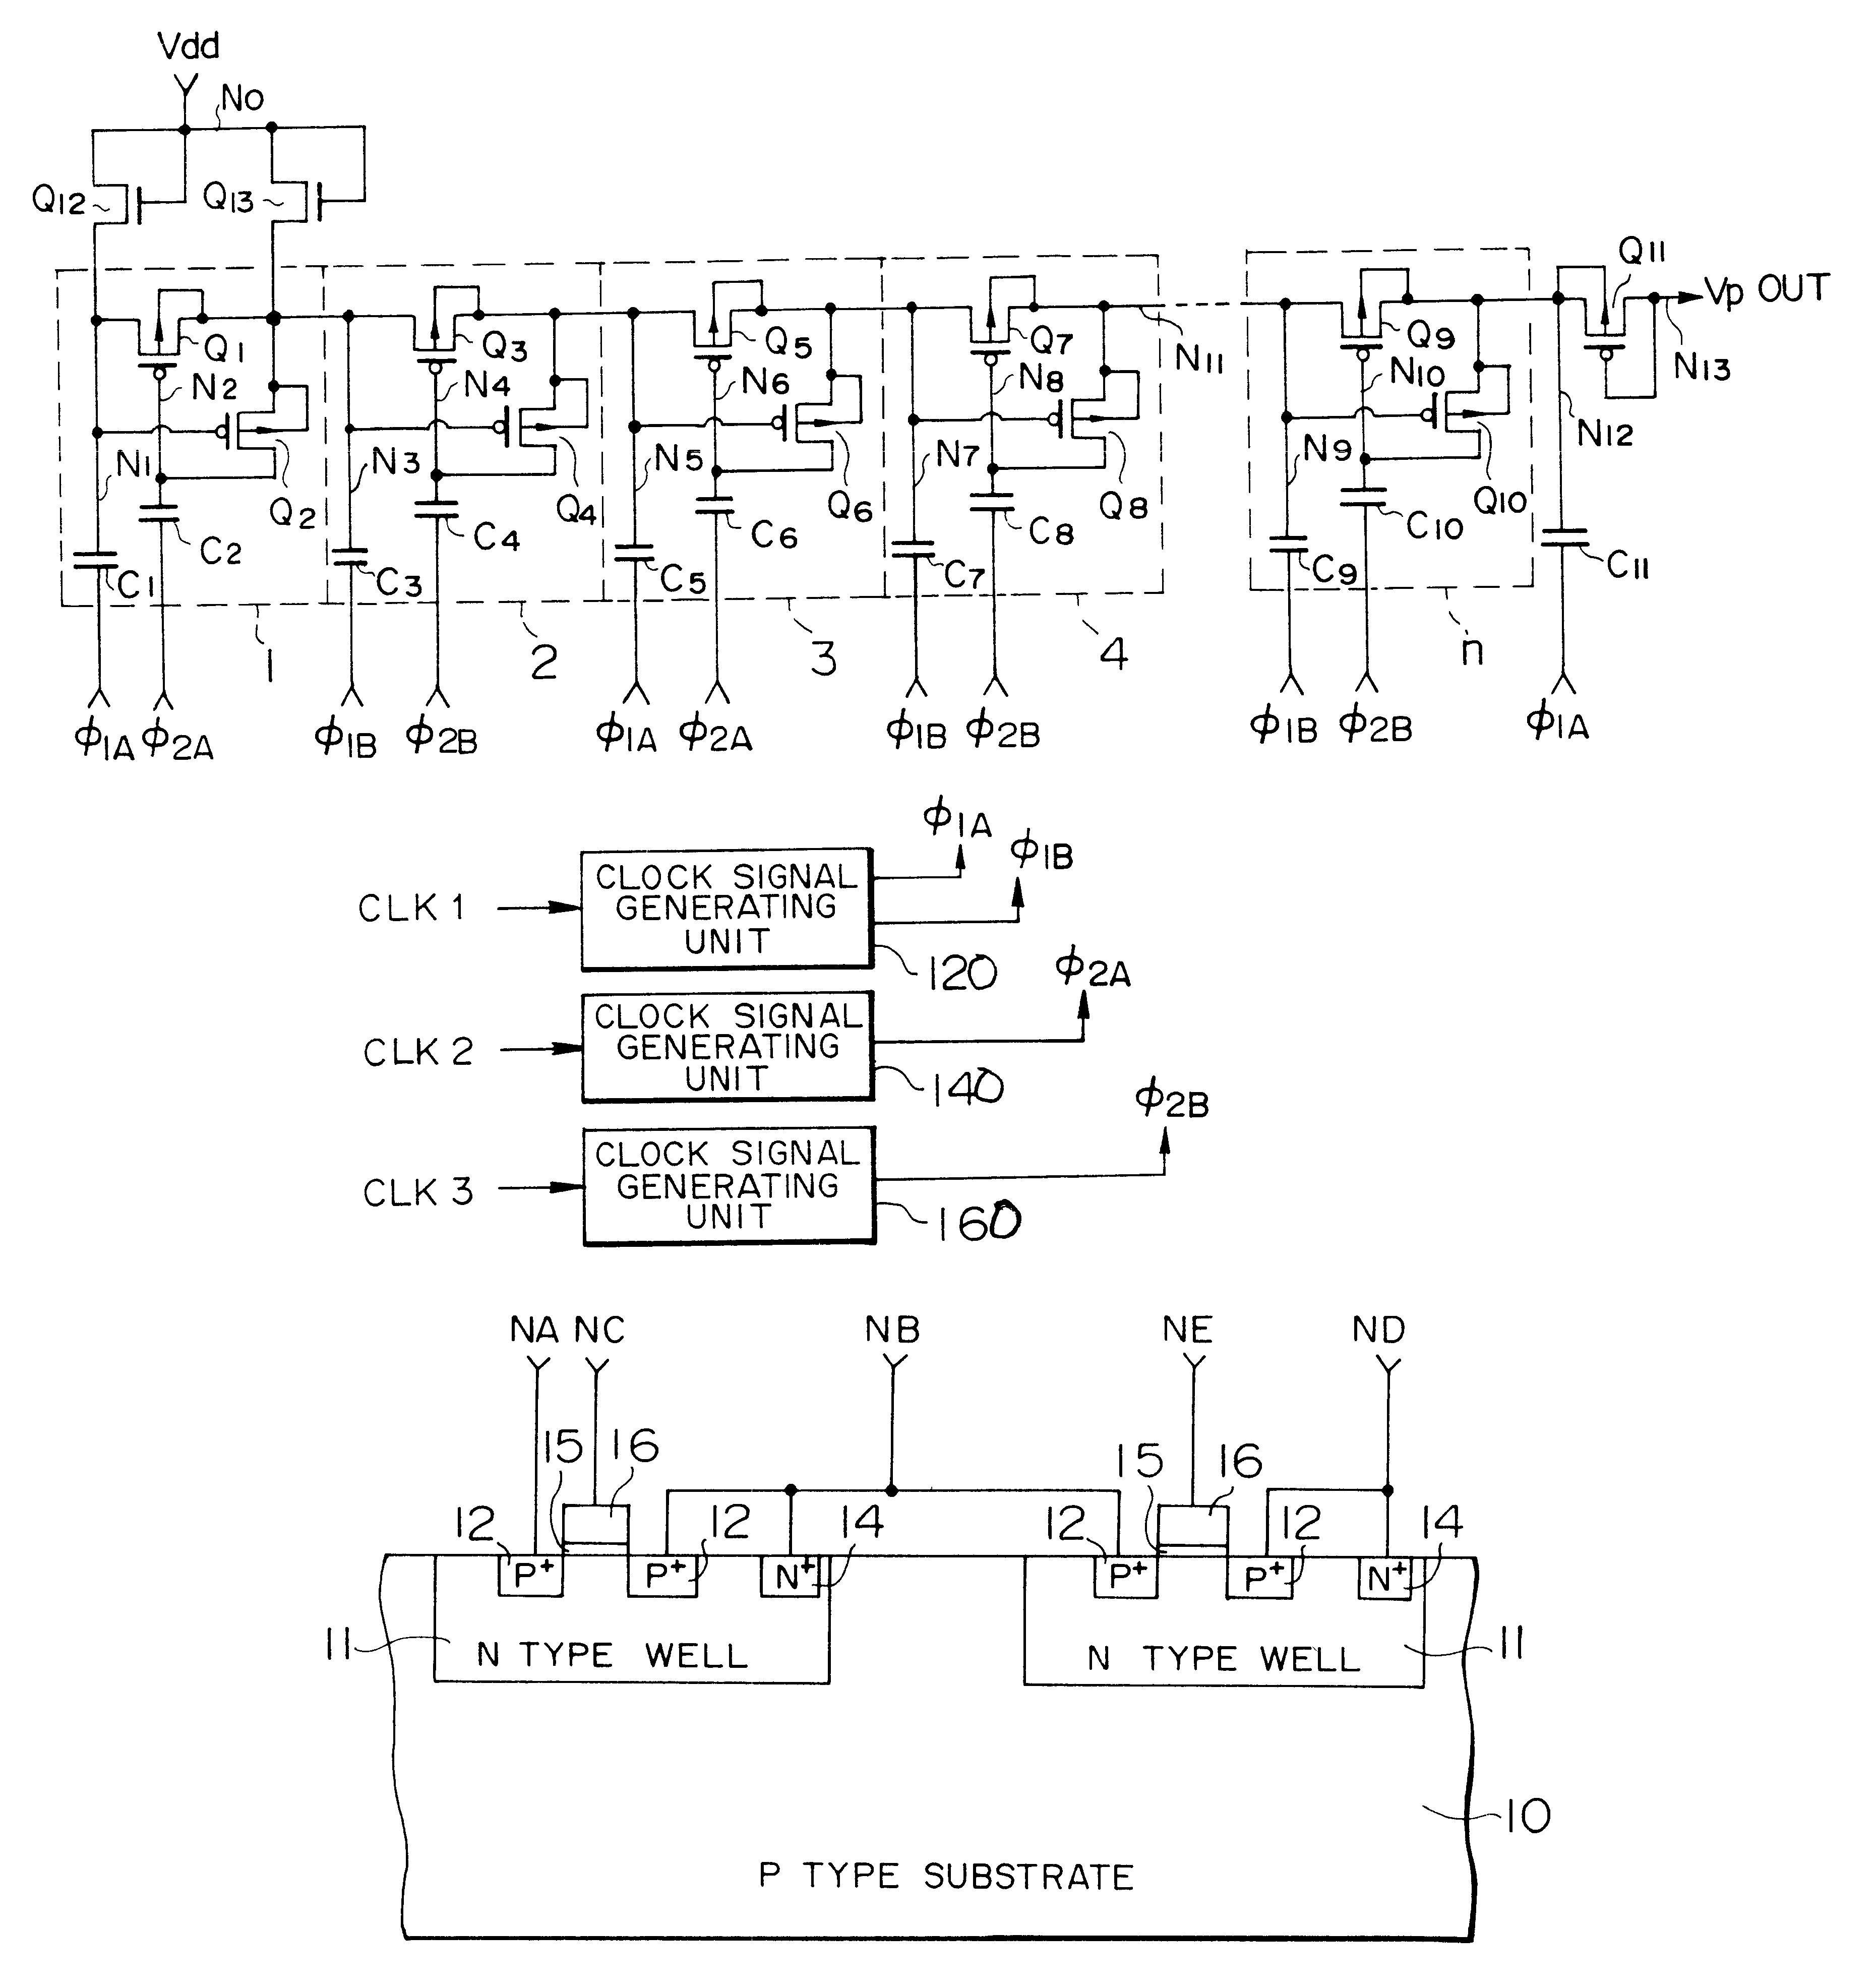 Semiconductor booster circuit having cascaded MOS transistors